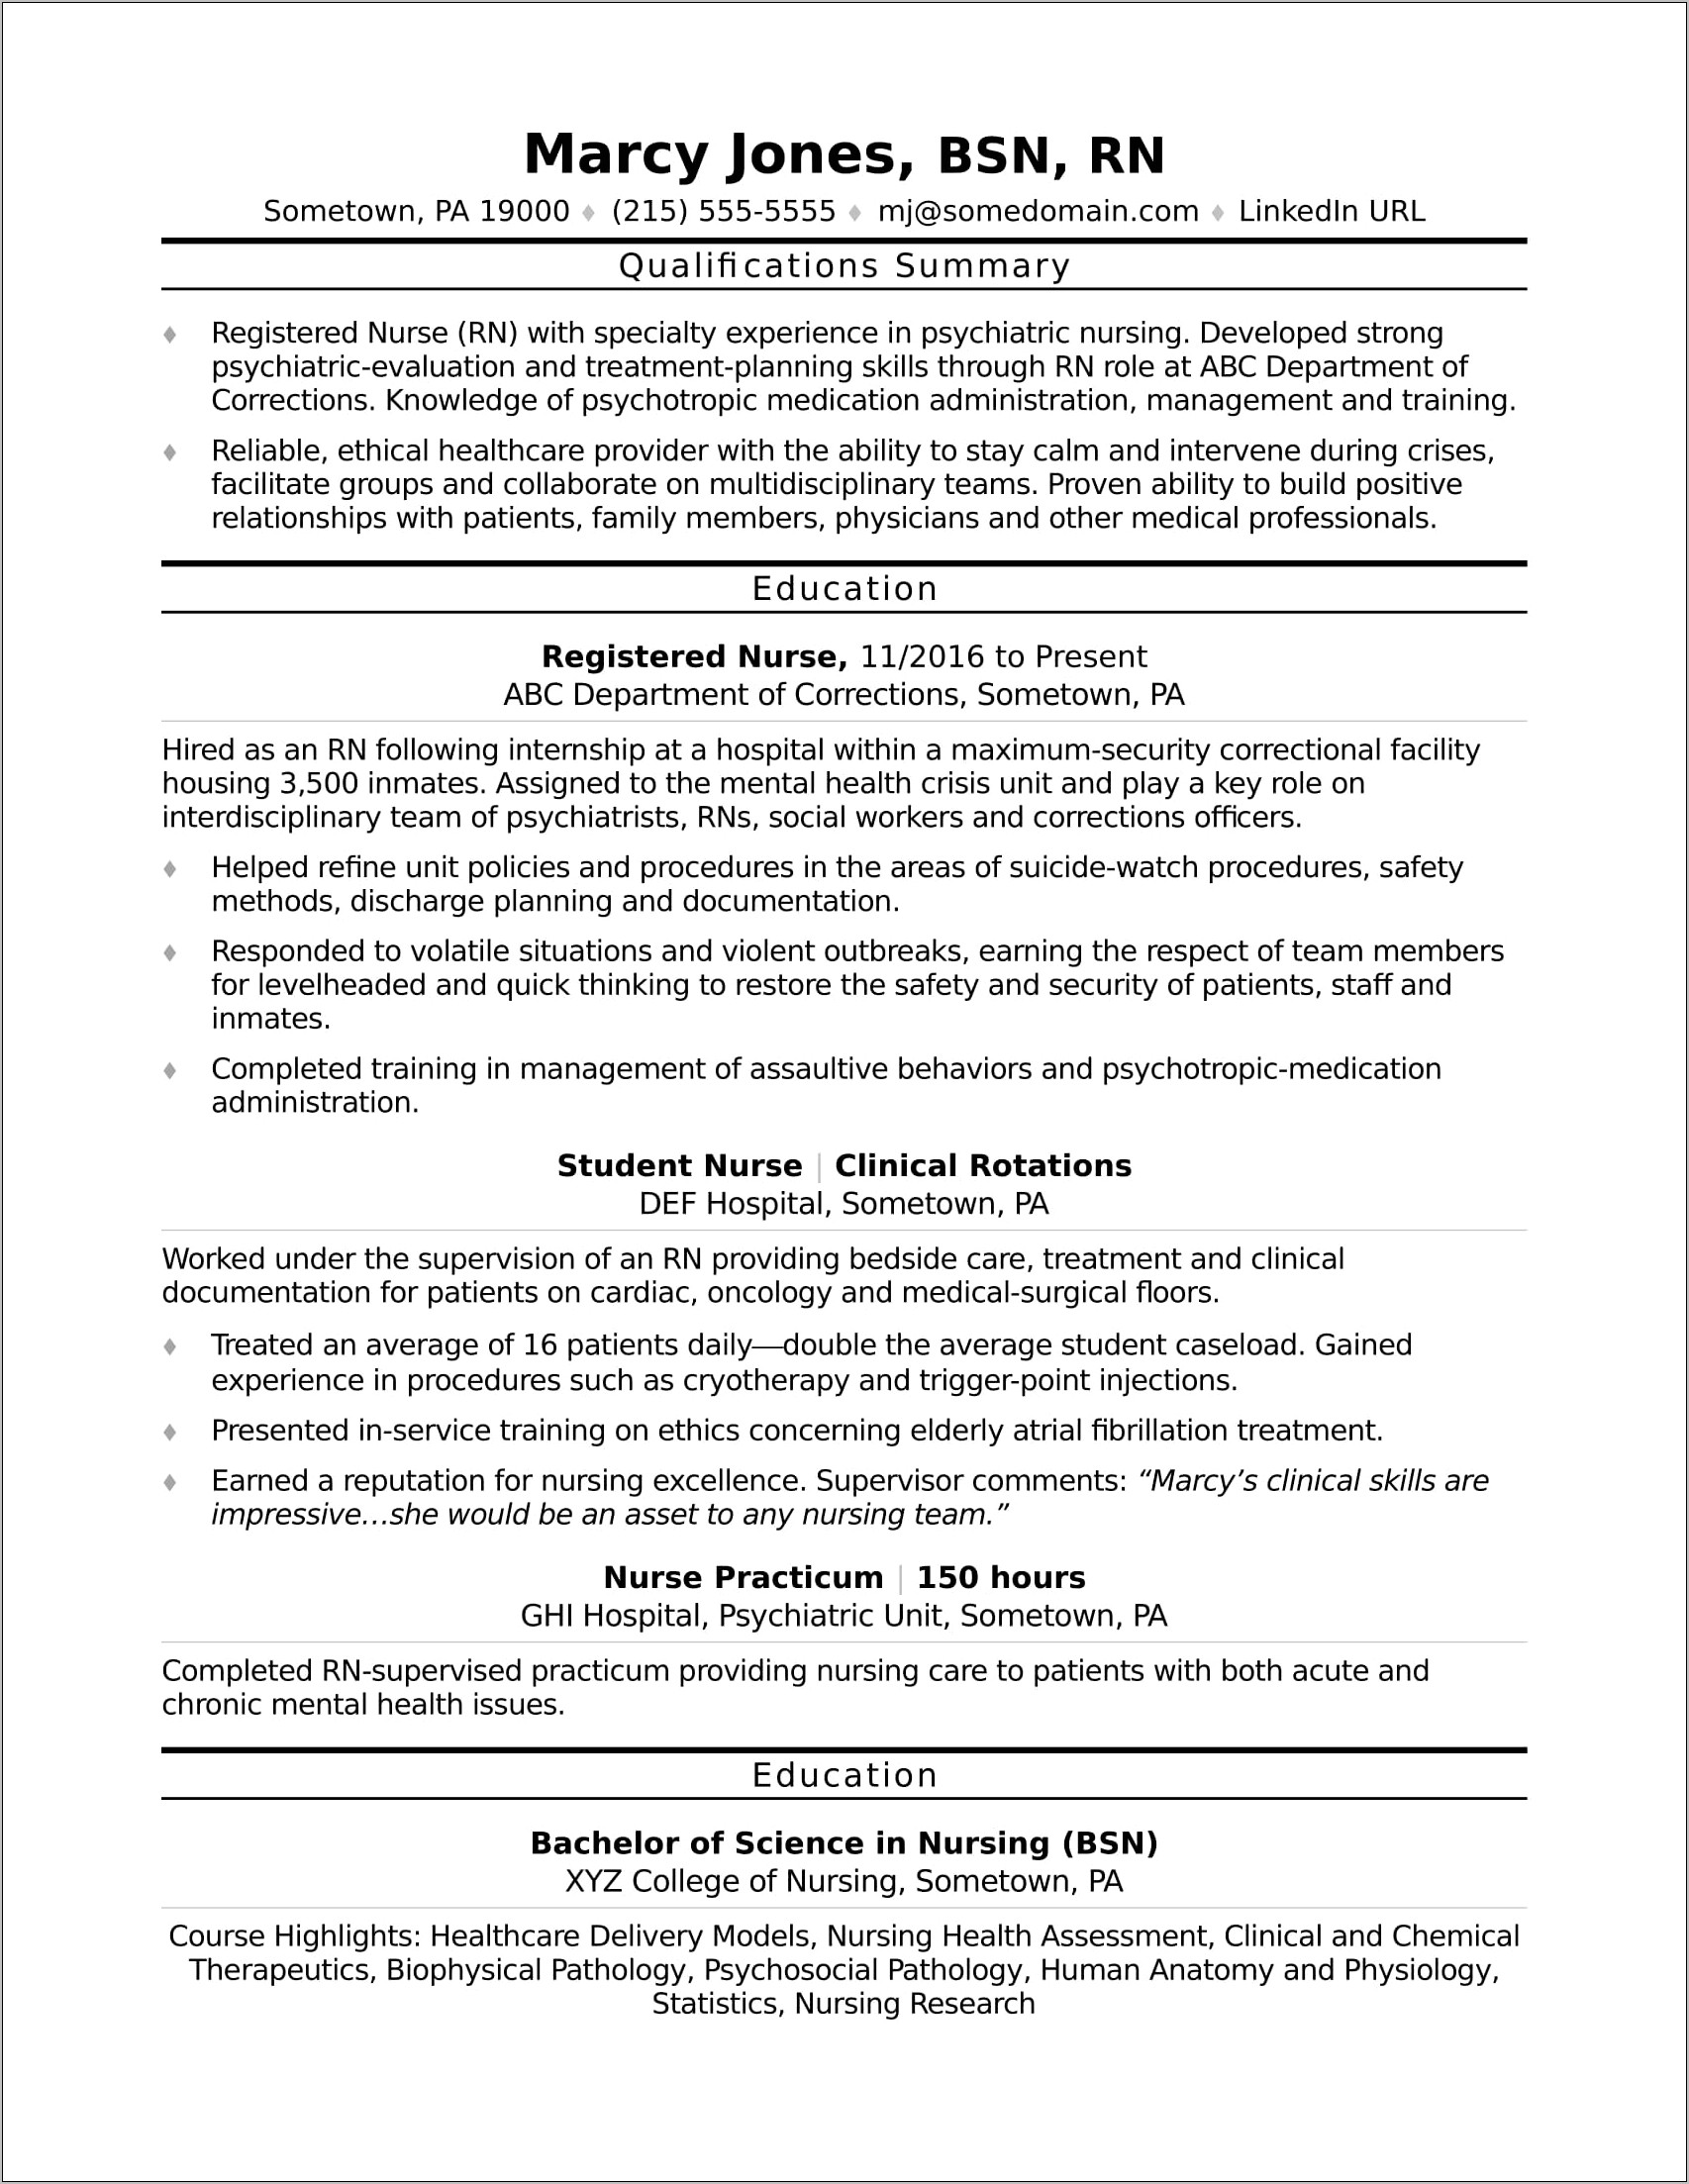 Nursing Qualifications And Skills For Resume